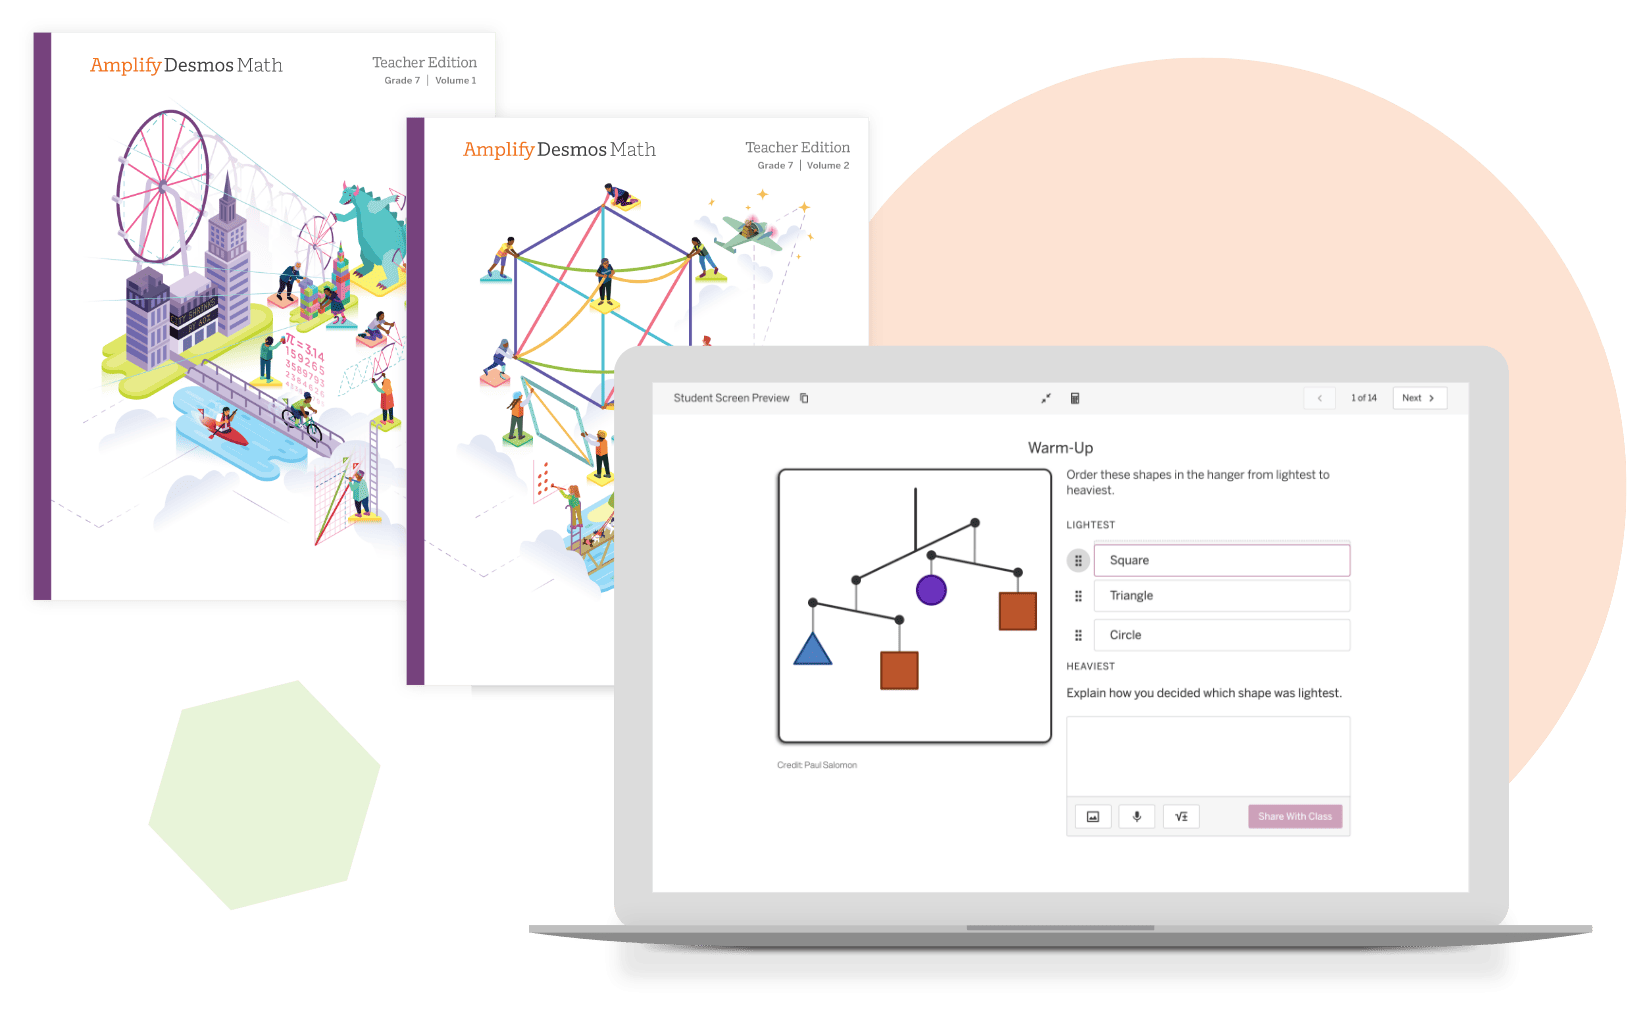 An illustration of various educational settings; on the left is a colorful, simplified cityscape with educational icons, and on the right, a laptop displaying an Amplify Desmos math lesson interface.